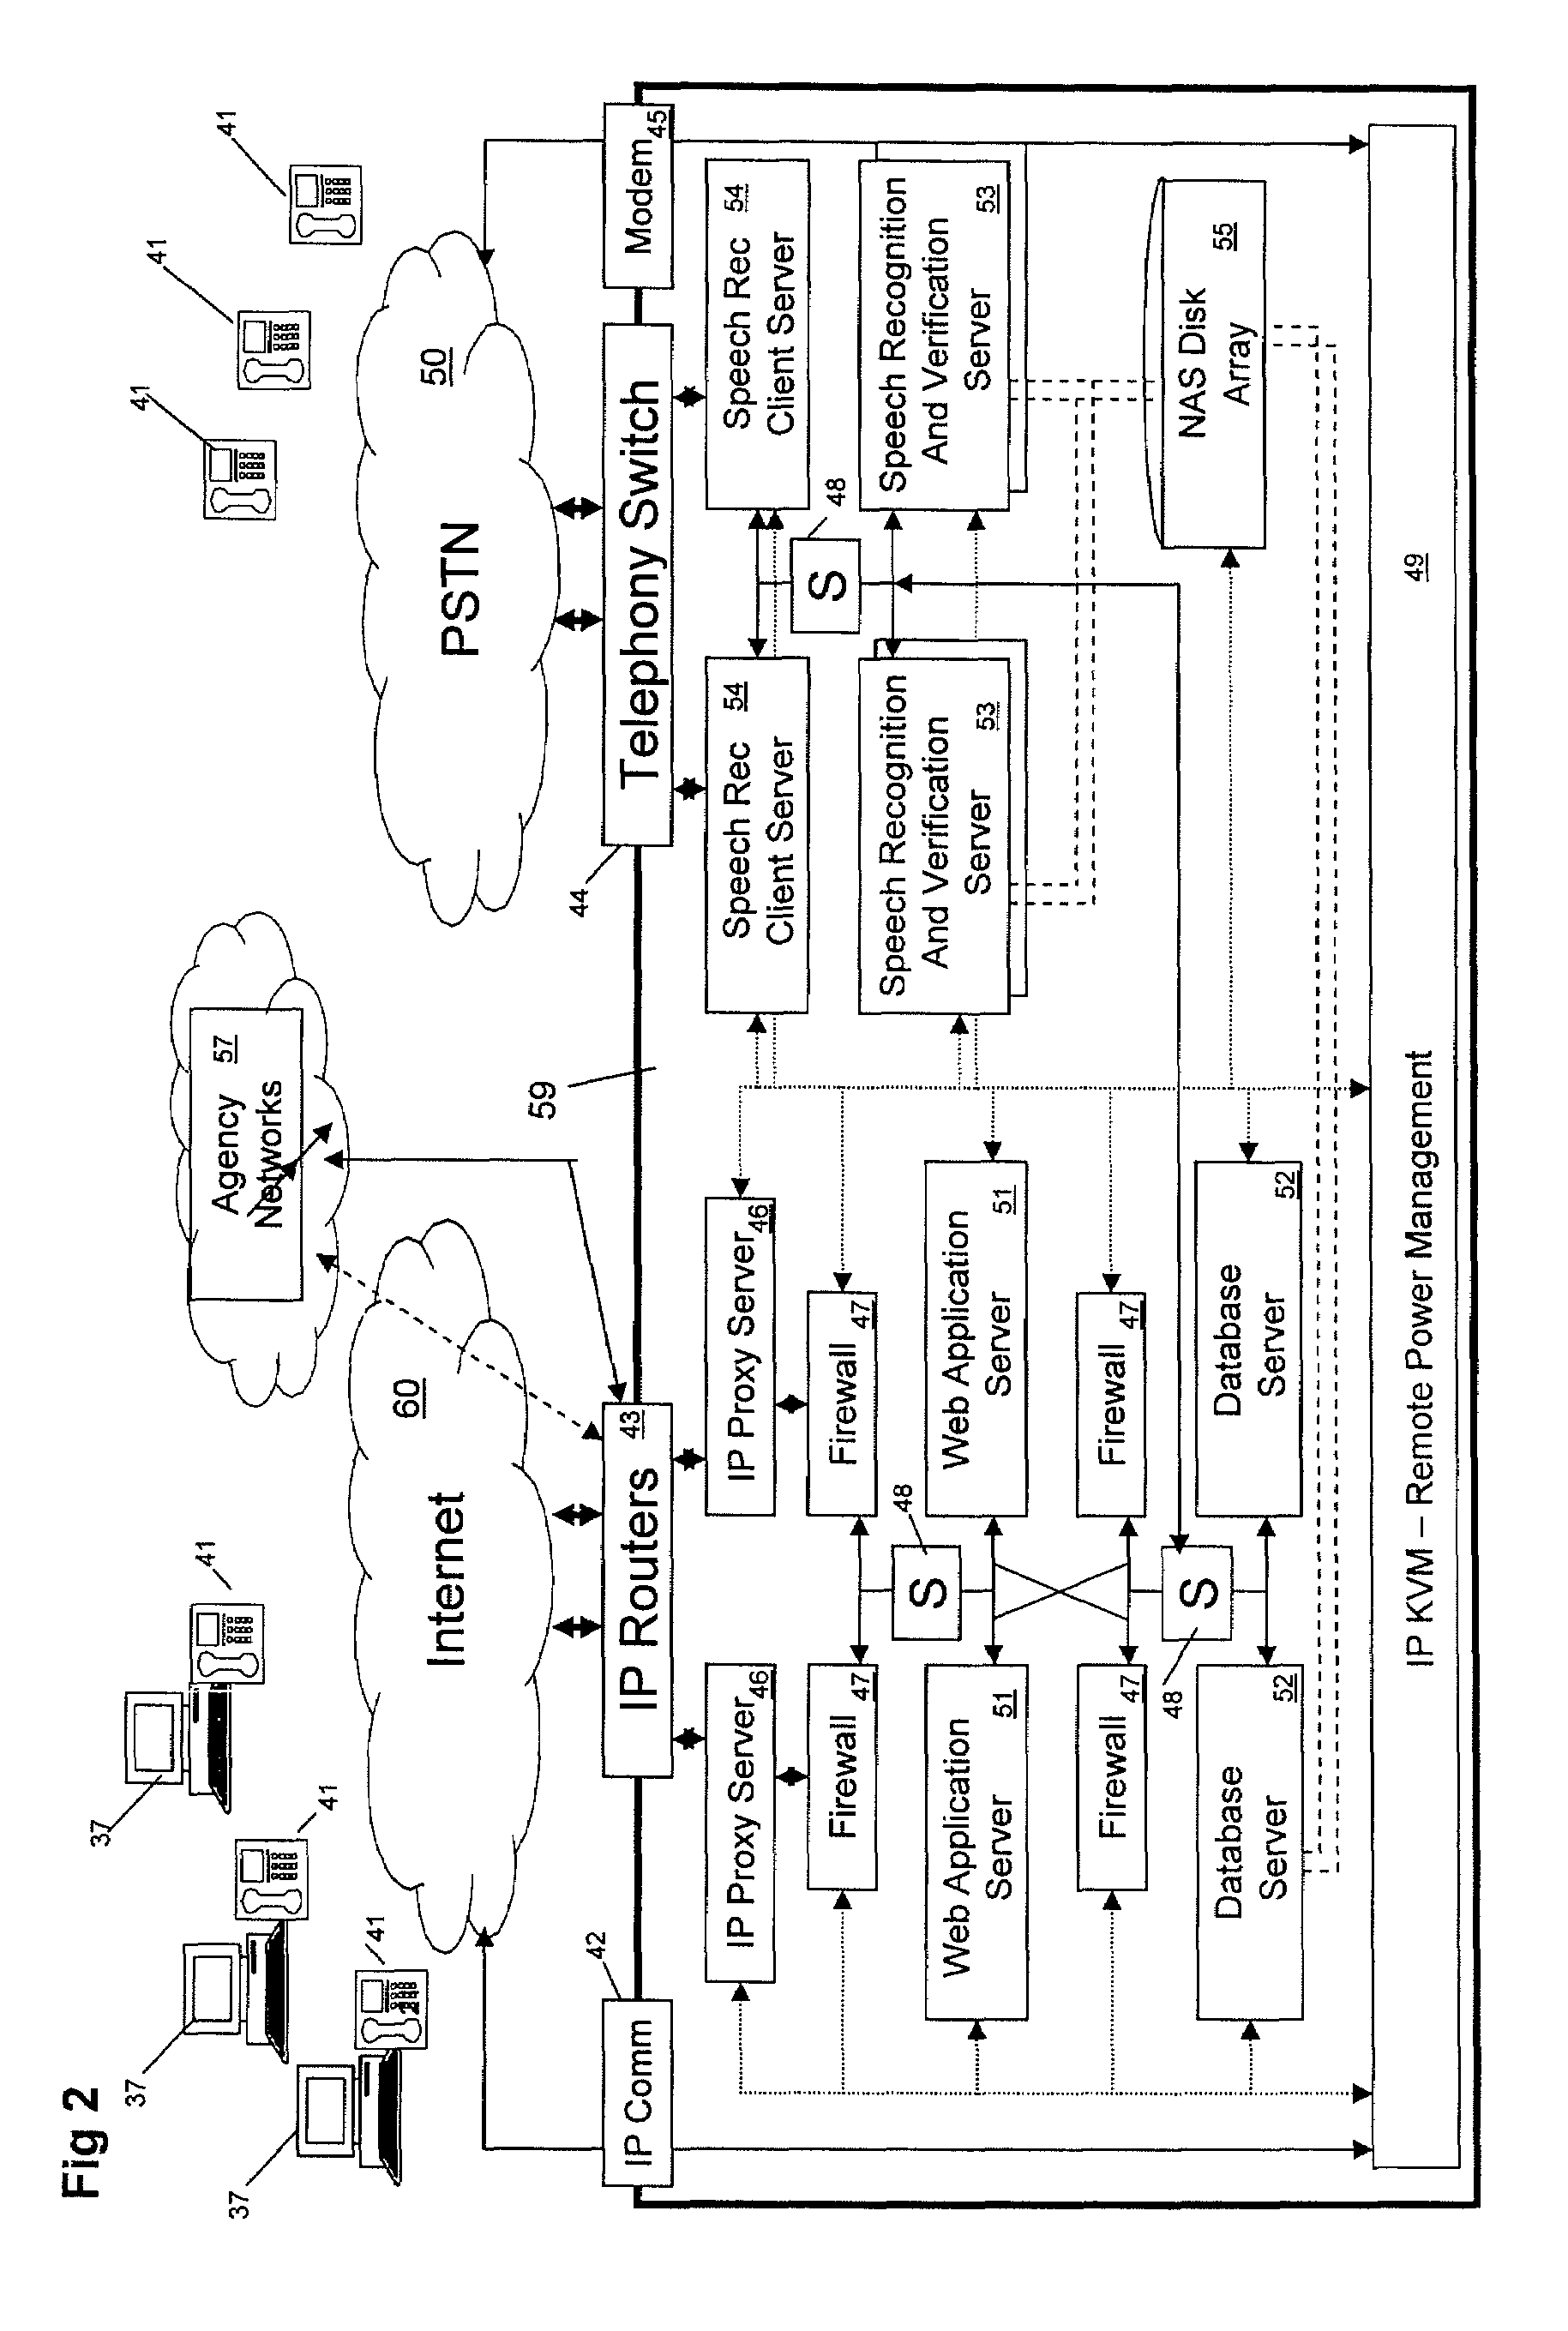 Graduated sanction/progressive response system and method for automated monitoring, scheduling and notification